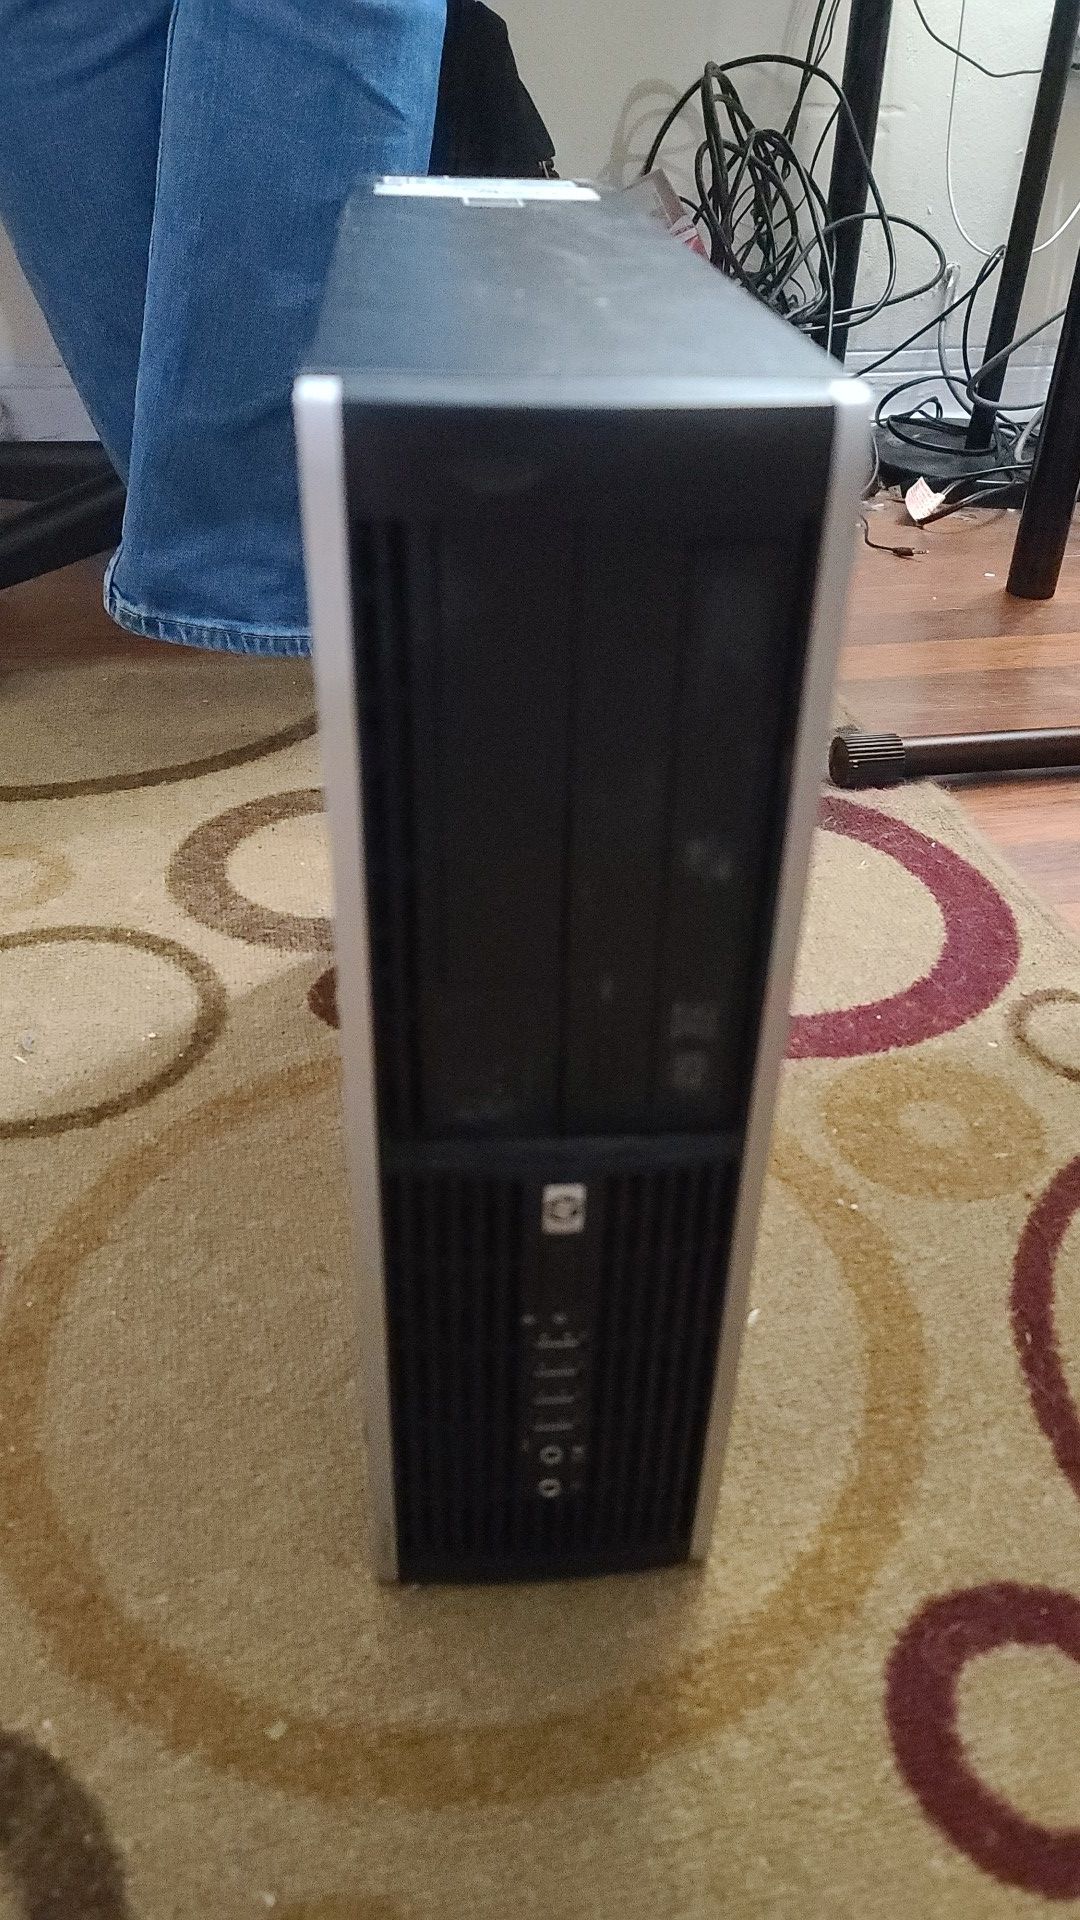 HP 8100 Elite Intel Core i7 with monitor